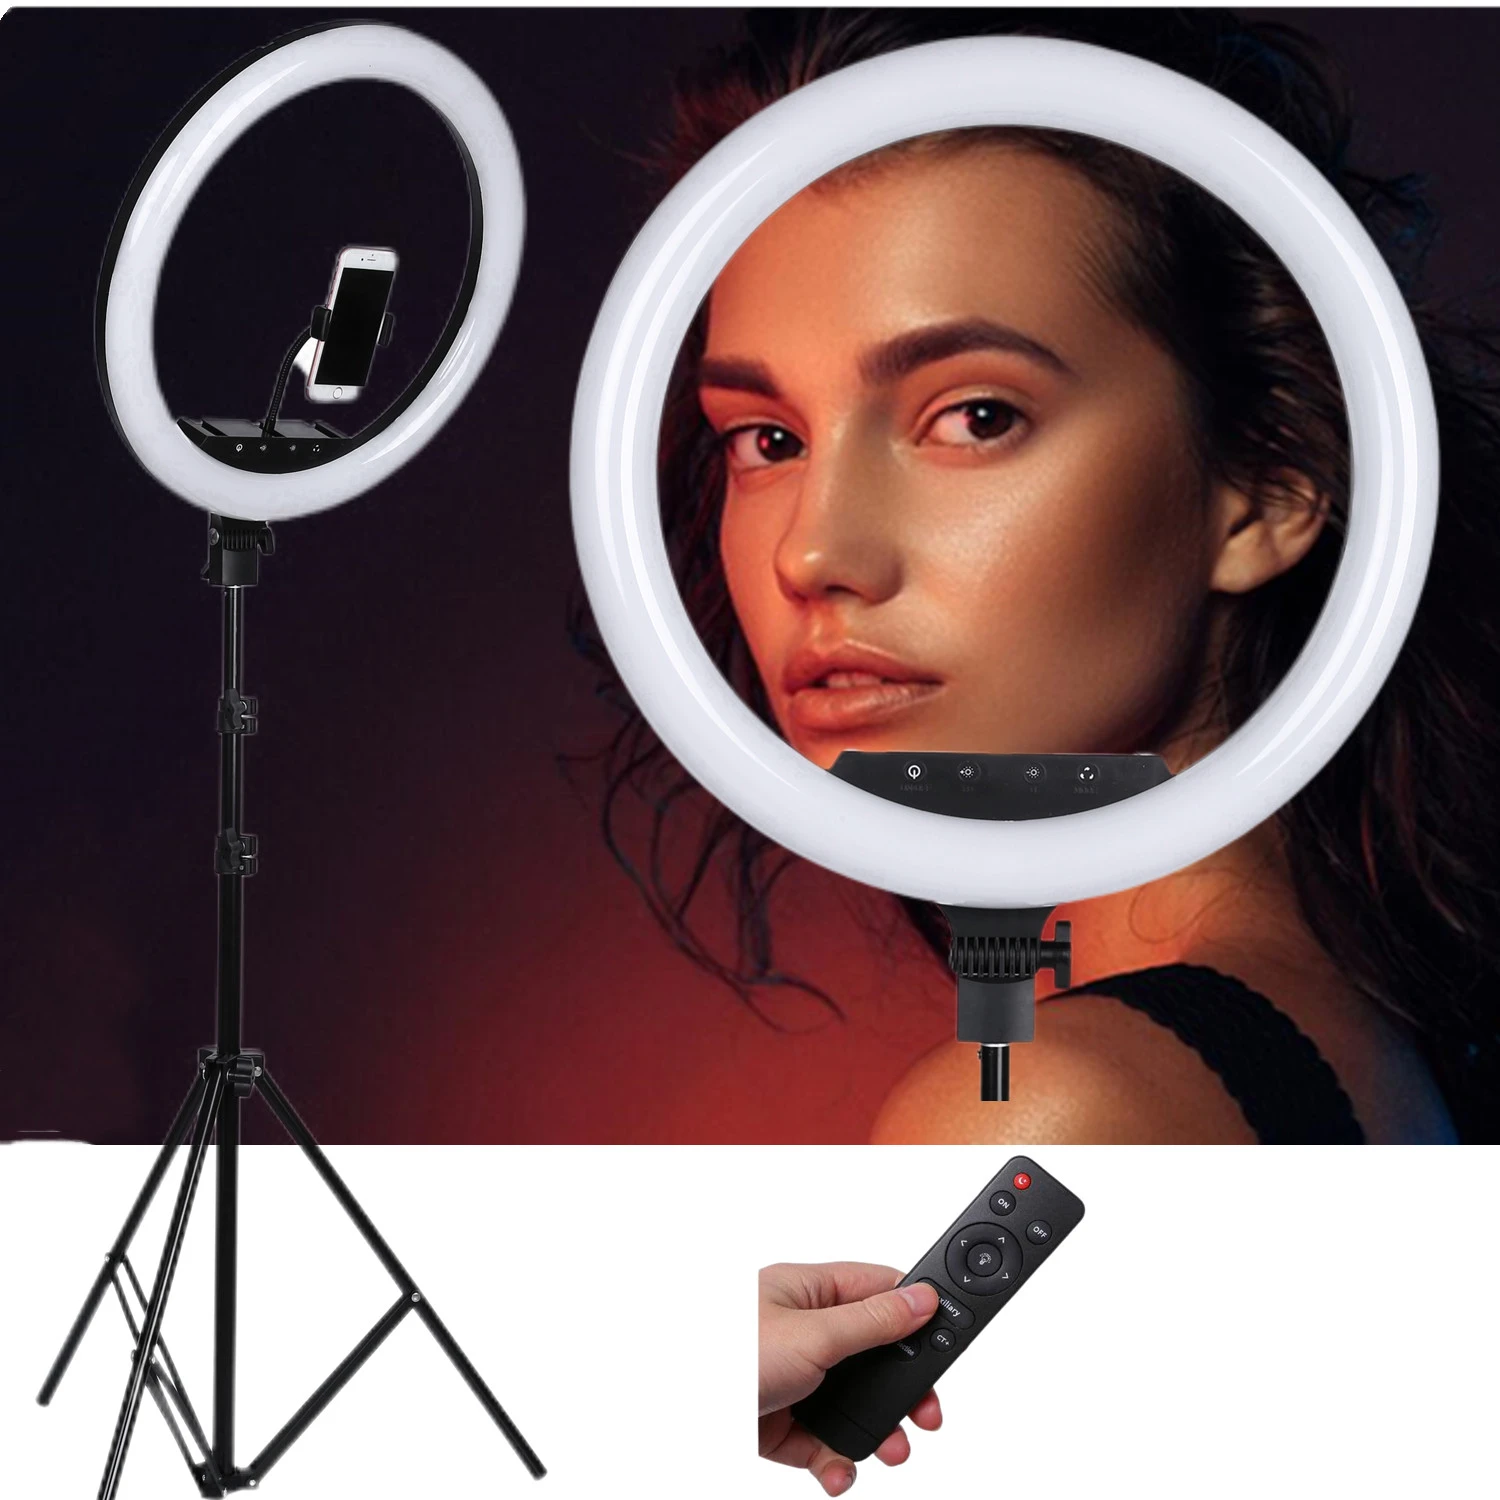 14/18inch Photo Studio lighting LED Ring Light  Large Ring Lamp With Stand Tripod for Phone Tiktok Youtube Portrait,Makeup,Video